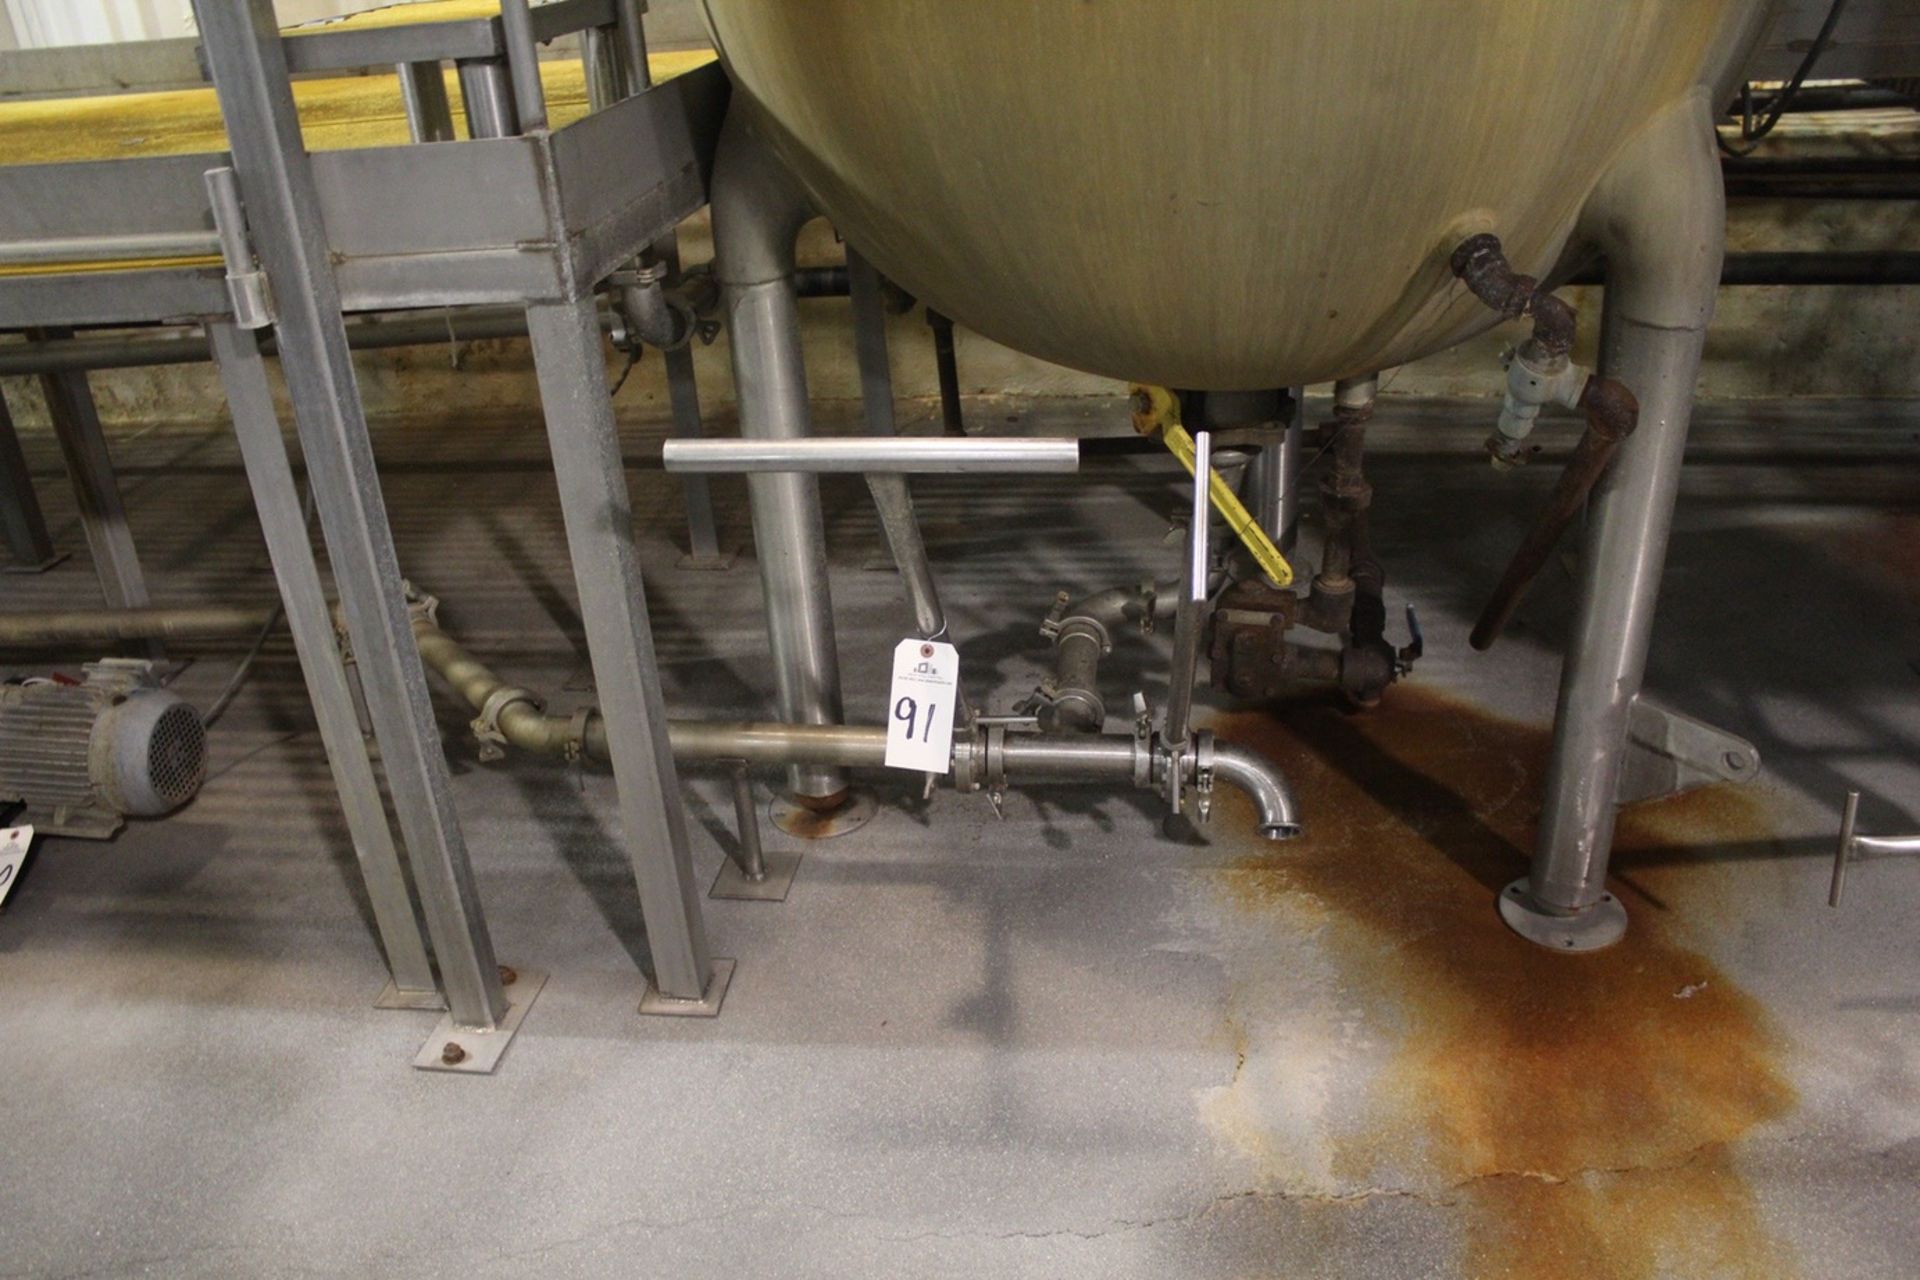 Remaining Sanitary Valves, Pipe & Fittings Above & Below Mixing Kettle Station | Rigging: $225 - Image 2 of 4